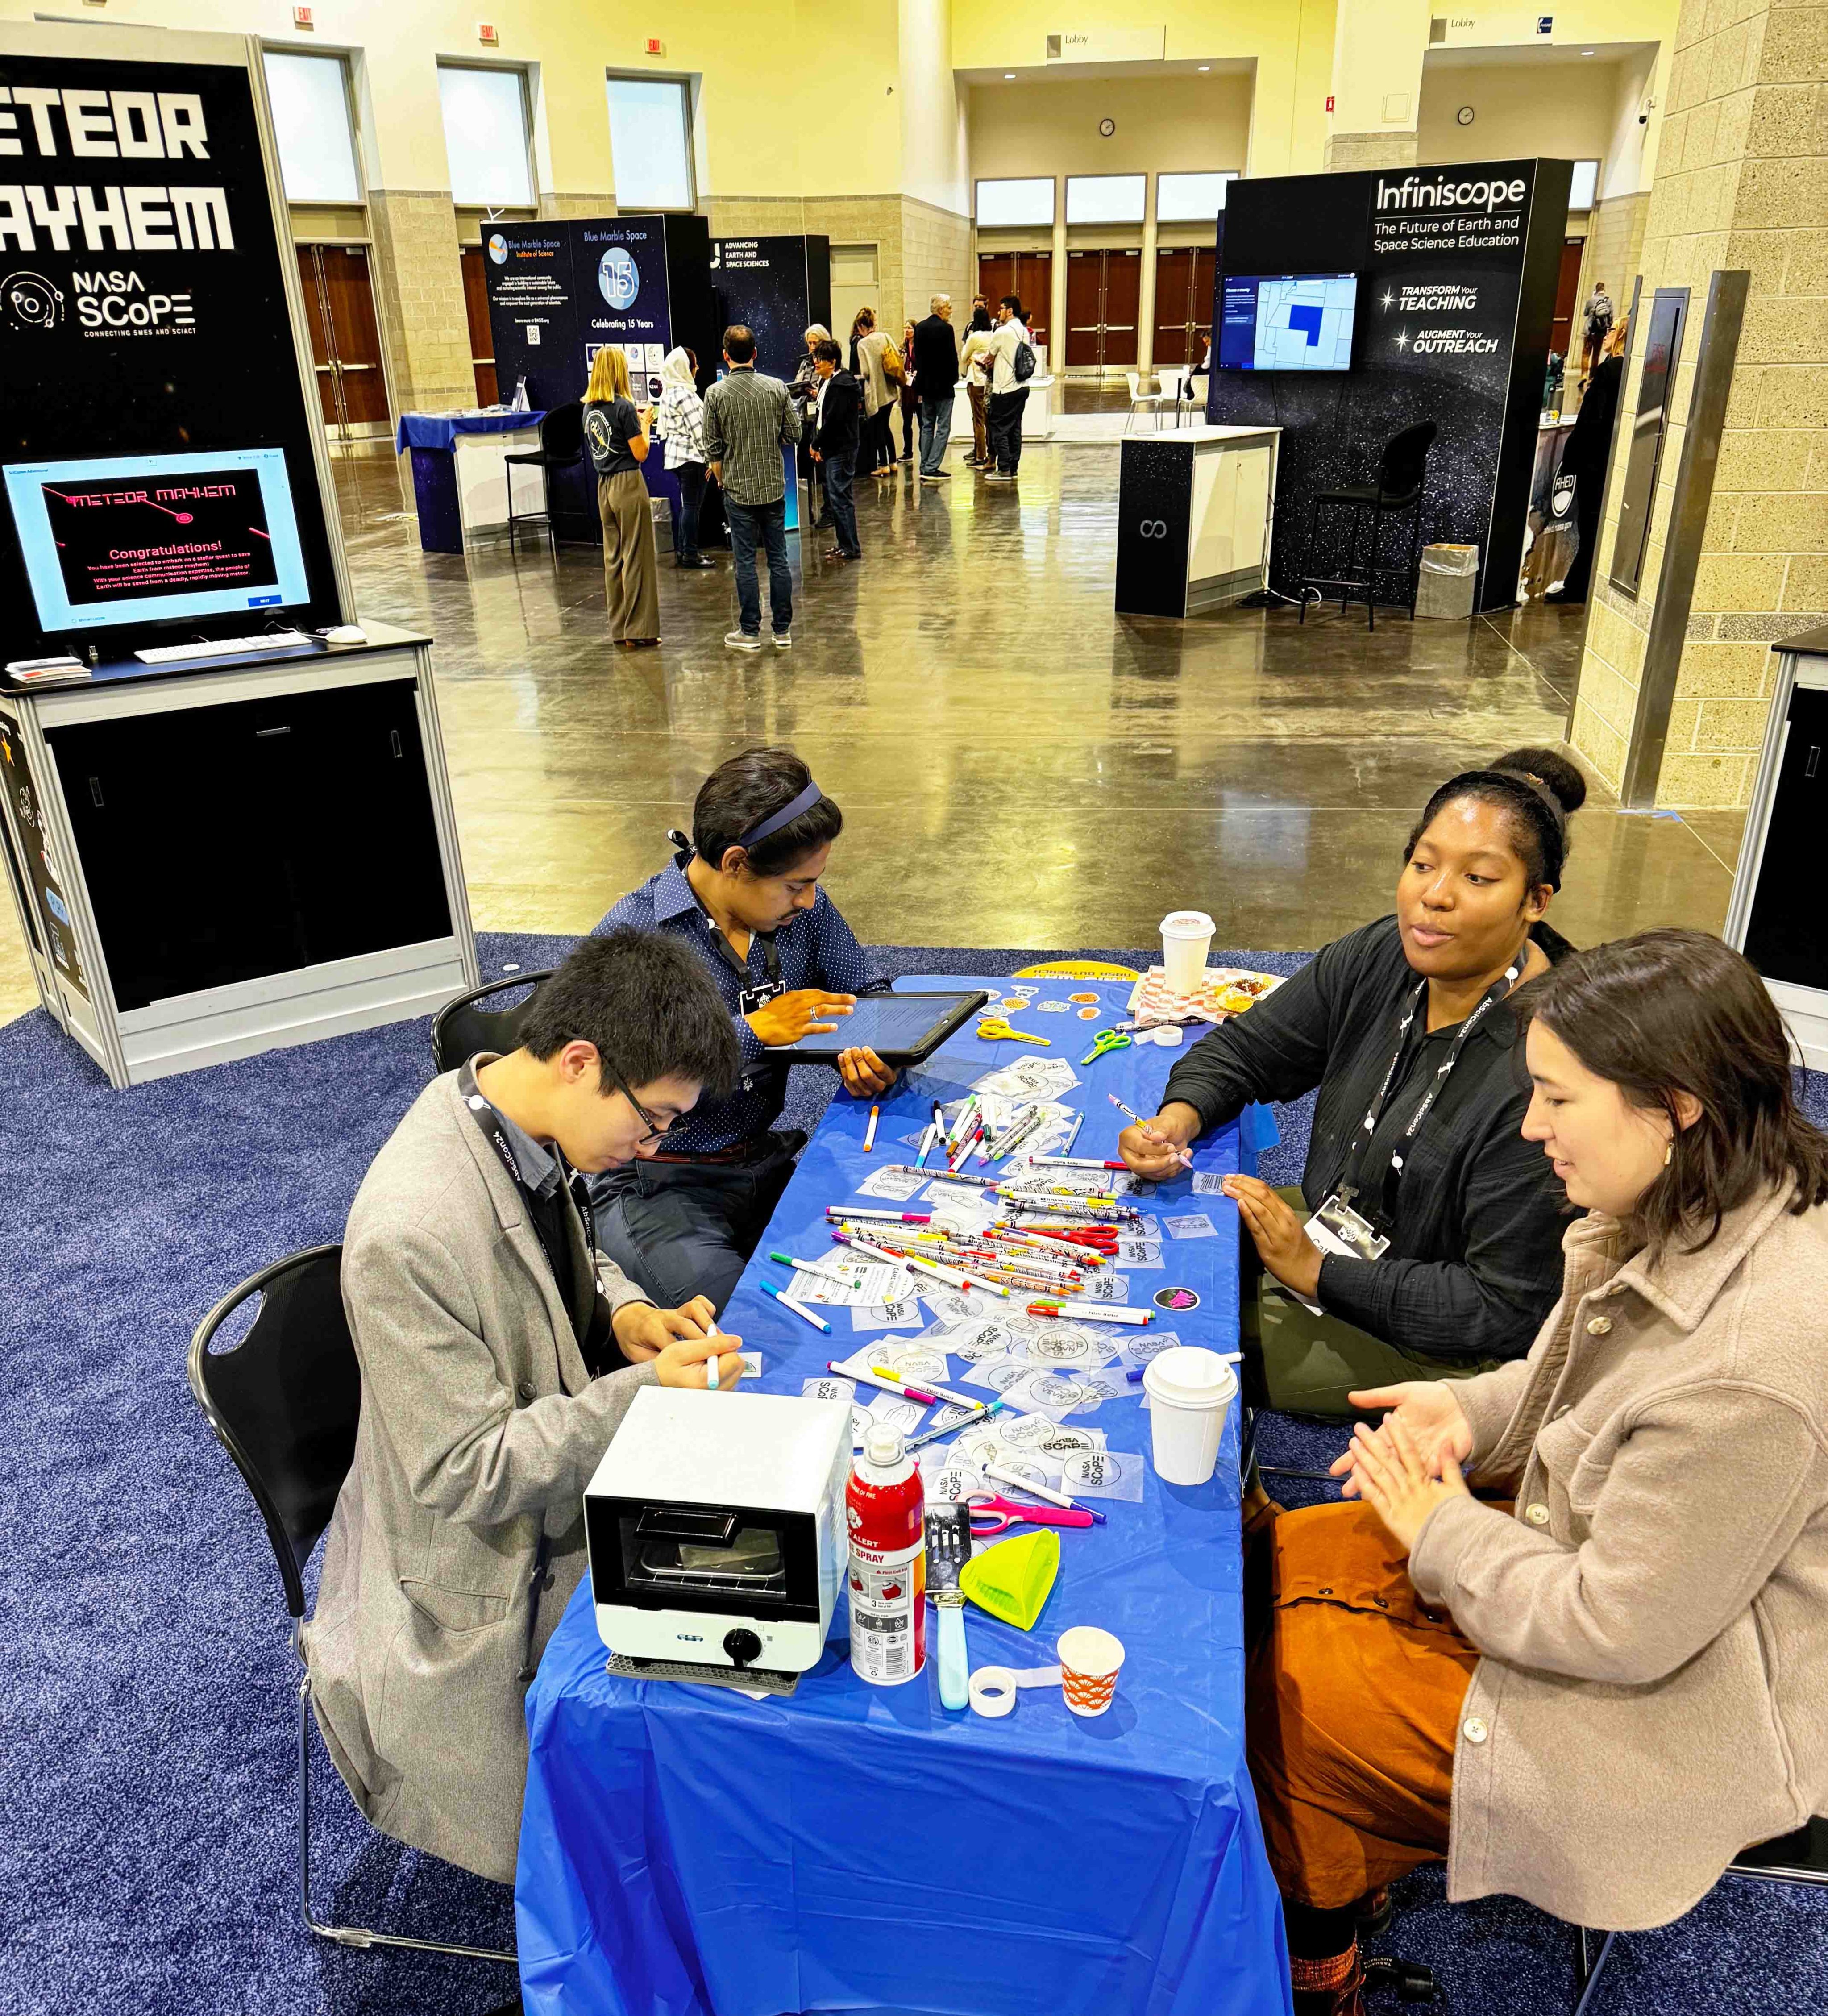 A group of four people, sitting around the exhibit hall table, engaging in a shrinky dink craft. The table is covered with a blue cloth and various materials including pens, badges, and small tools. Behind them are exhibit booths labeled "Meteor Mayhem" and "Infiniscope," with additional conference attendees visible in the background.